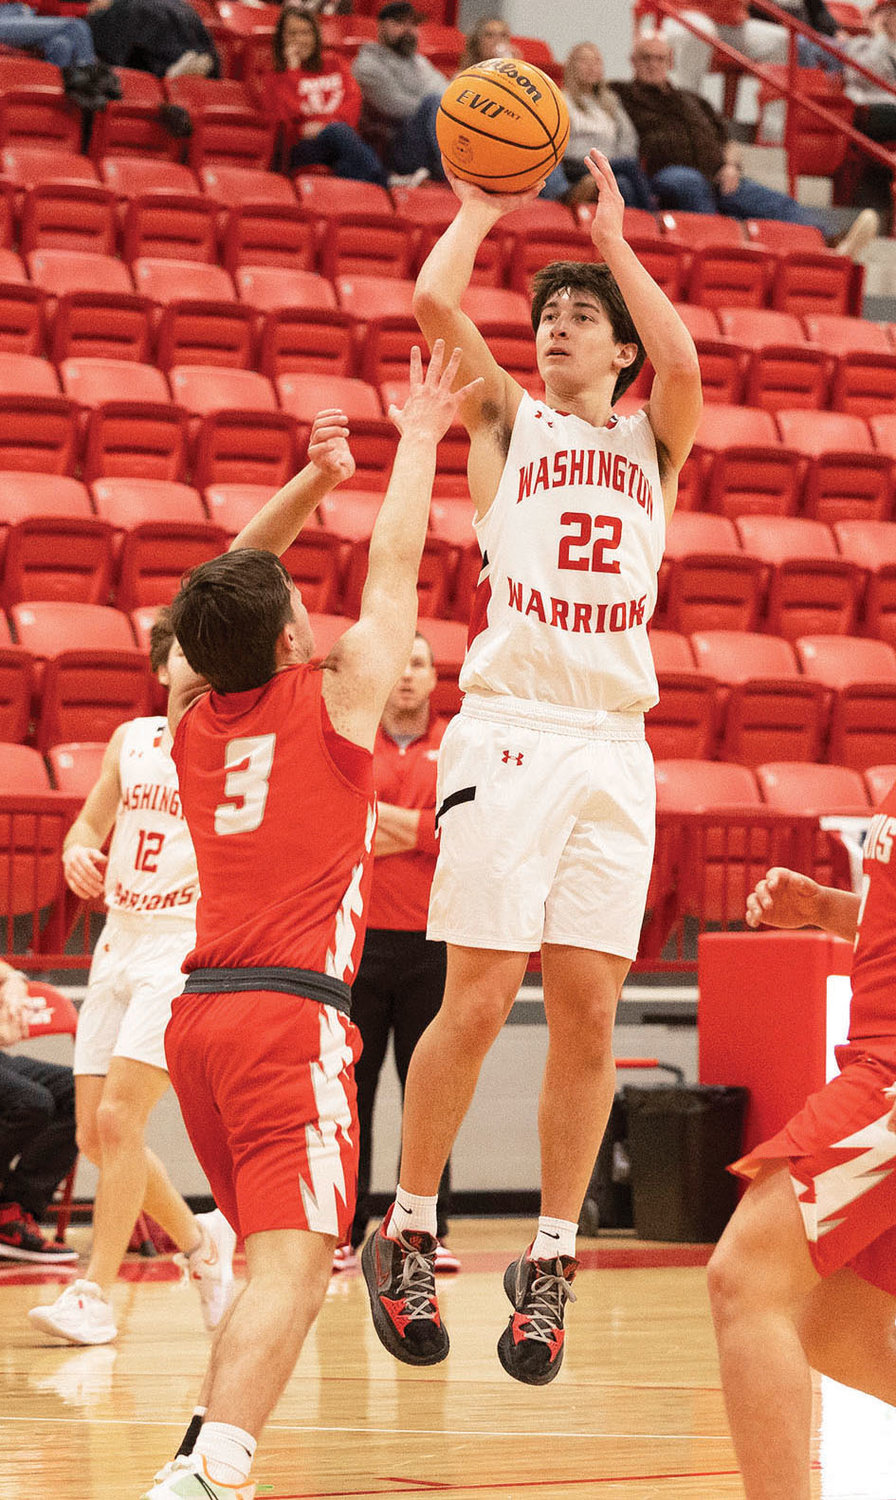 Washington sophomore Mason Adams pulls up for a jump shot during the Warriors’ 77-64 win over the Wolves. Adams scored a team-high 18 points.